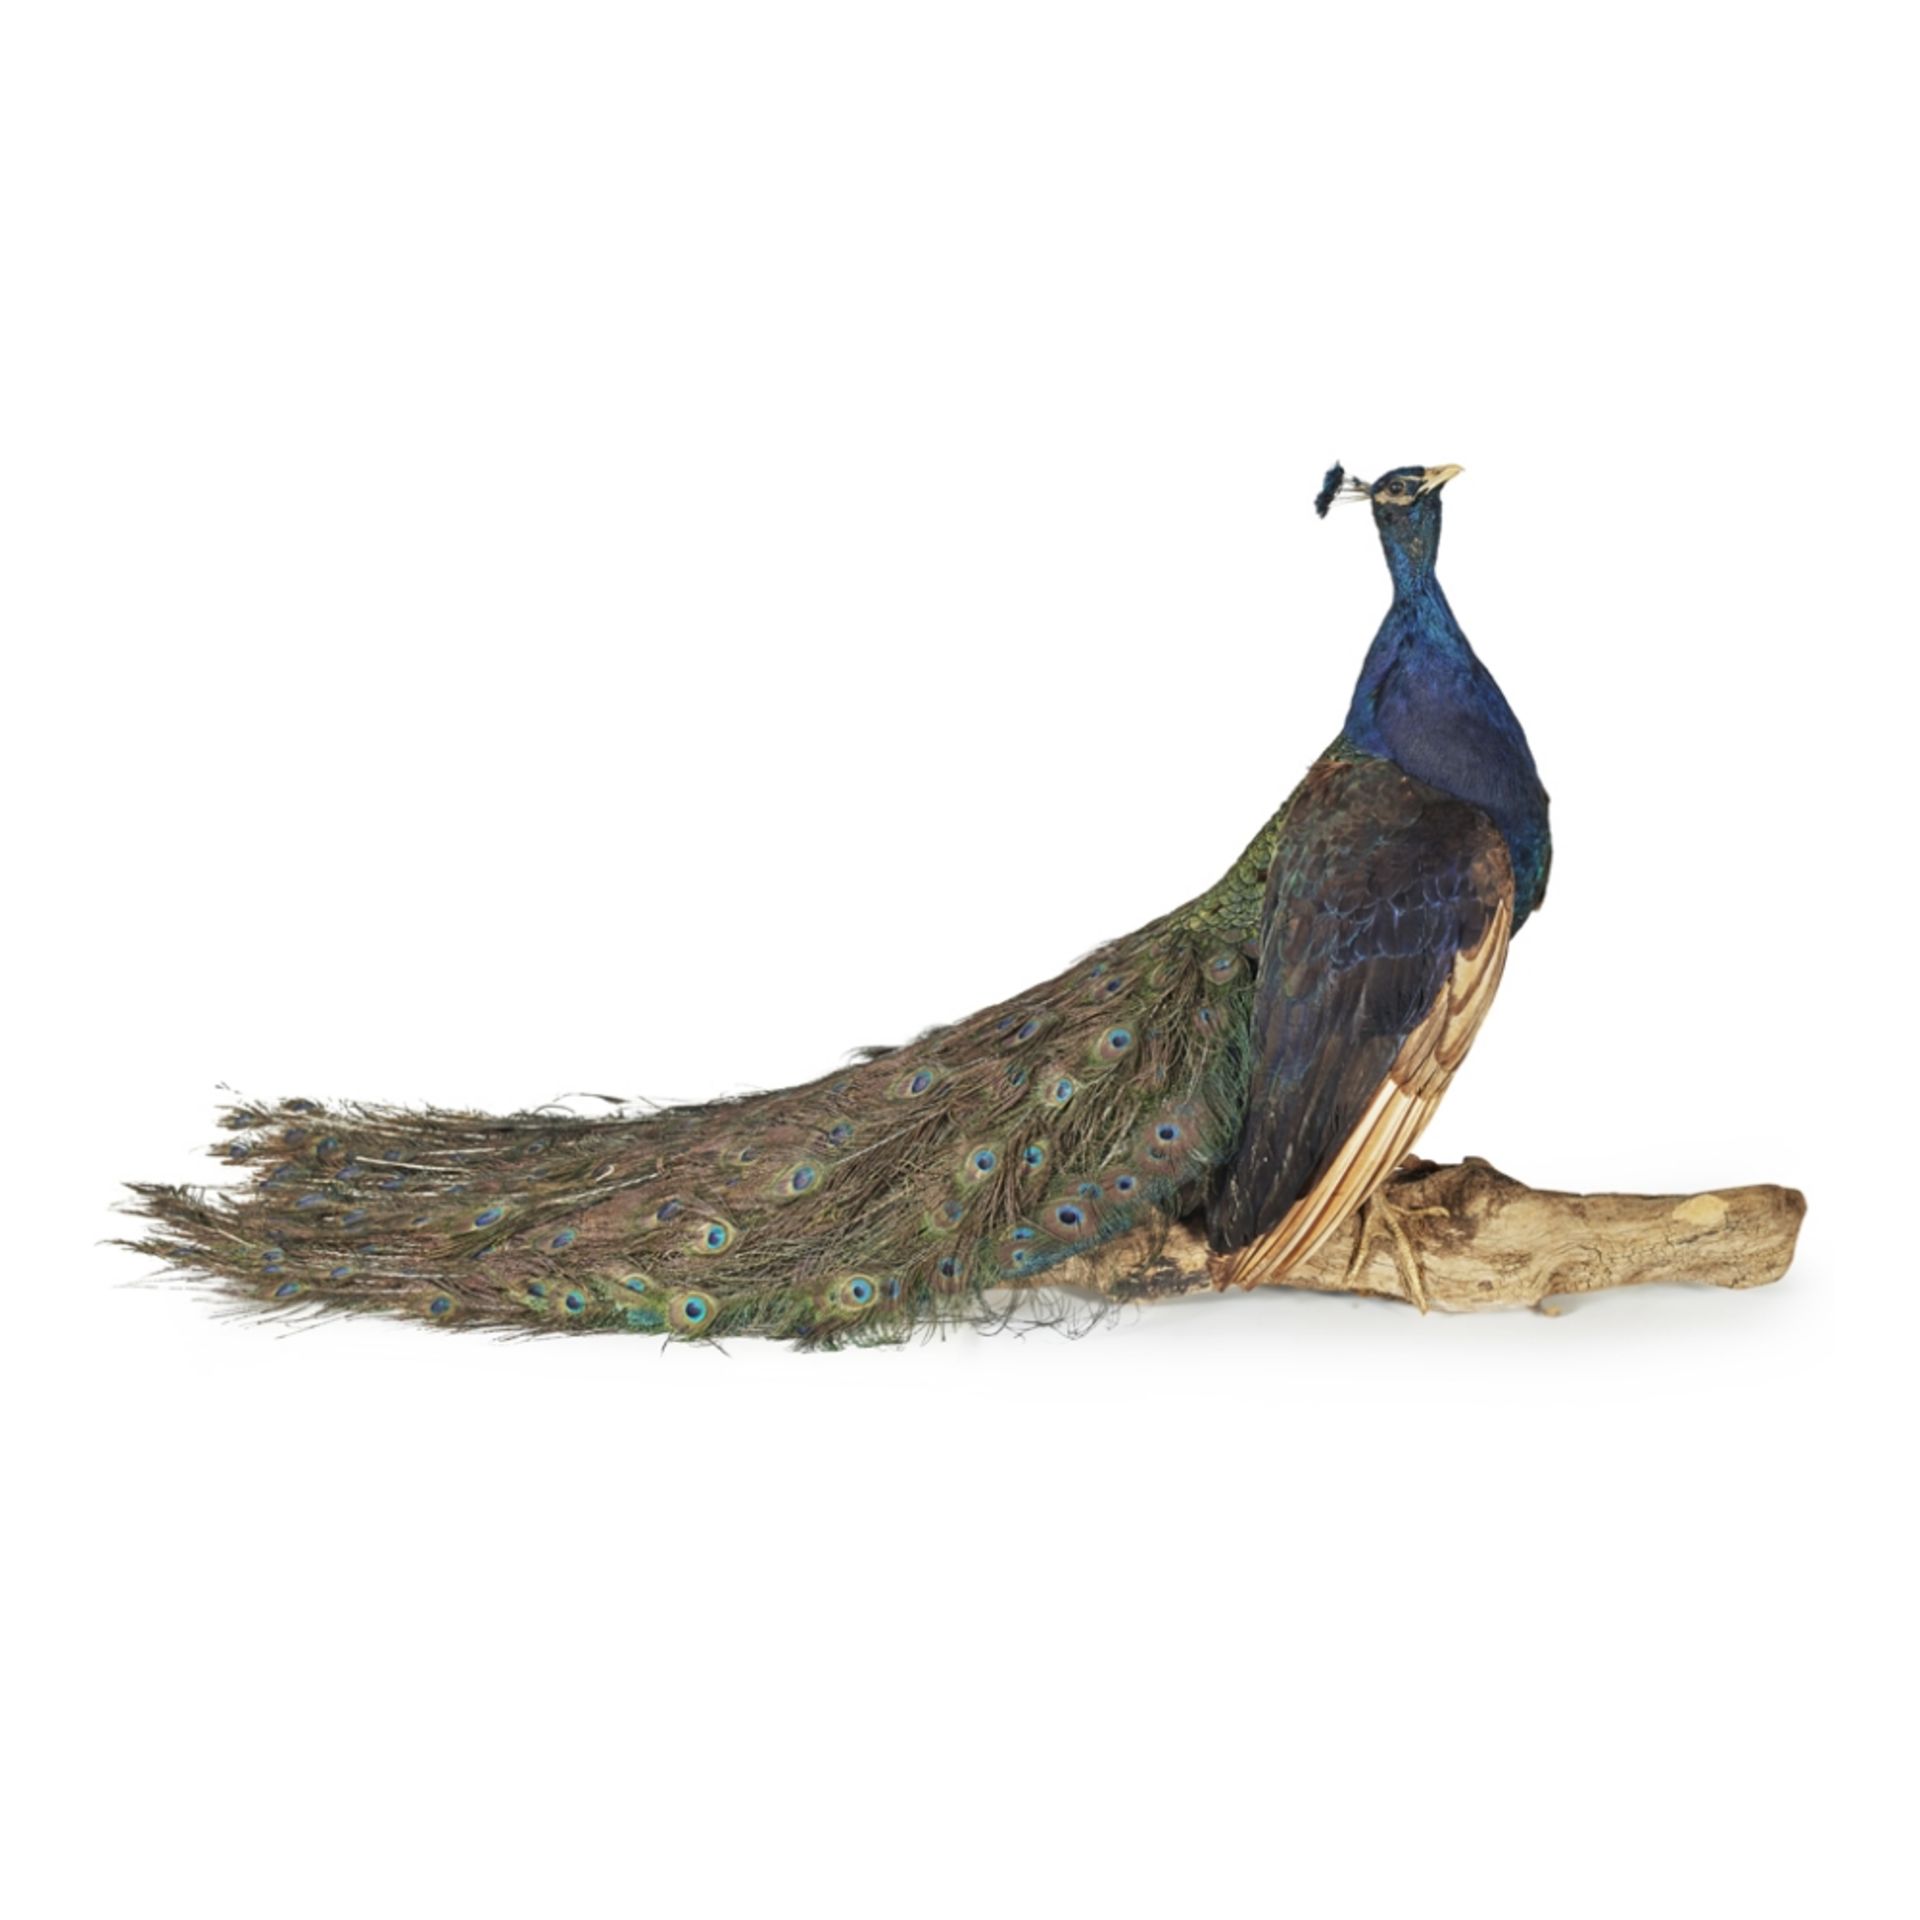 TAXIDERMY PEACOCK EARLY 20TH CENTURY full specimen, mounted on a natural wood stand 106cm long